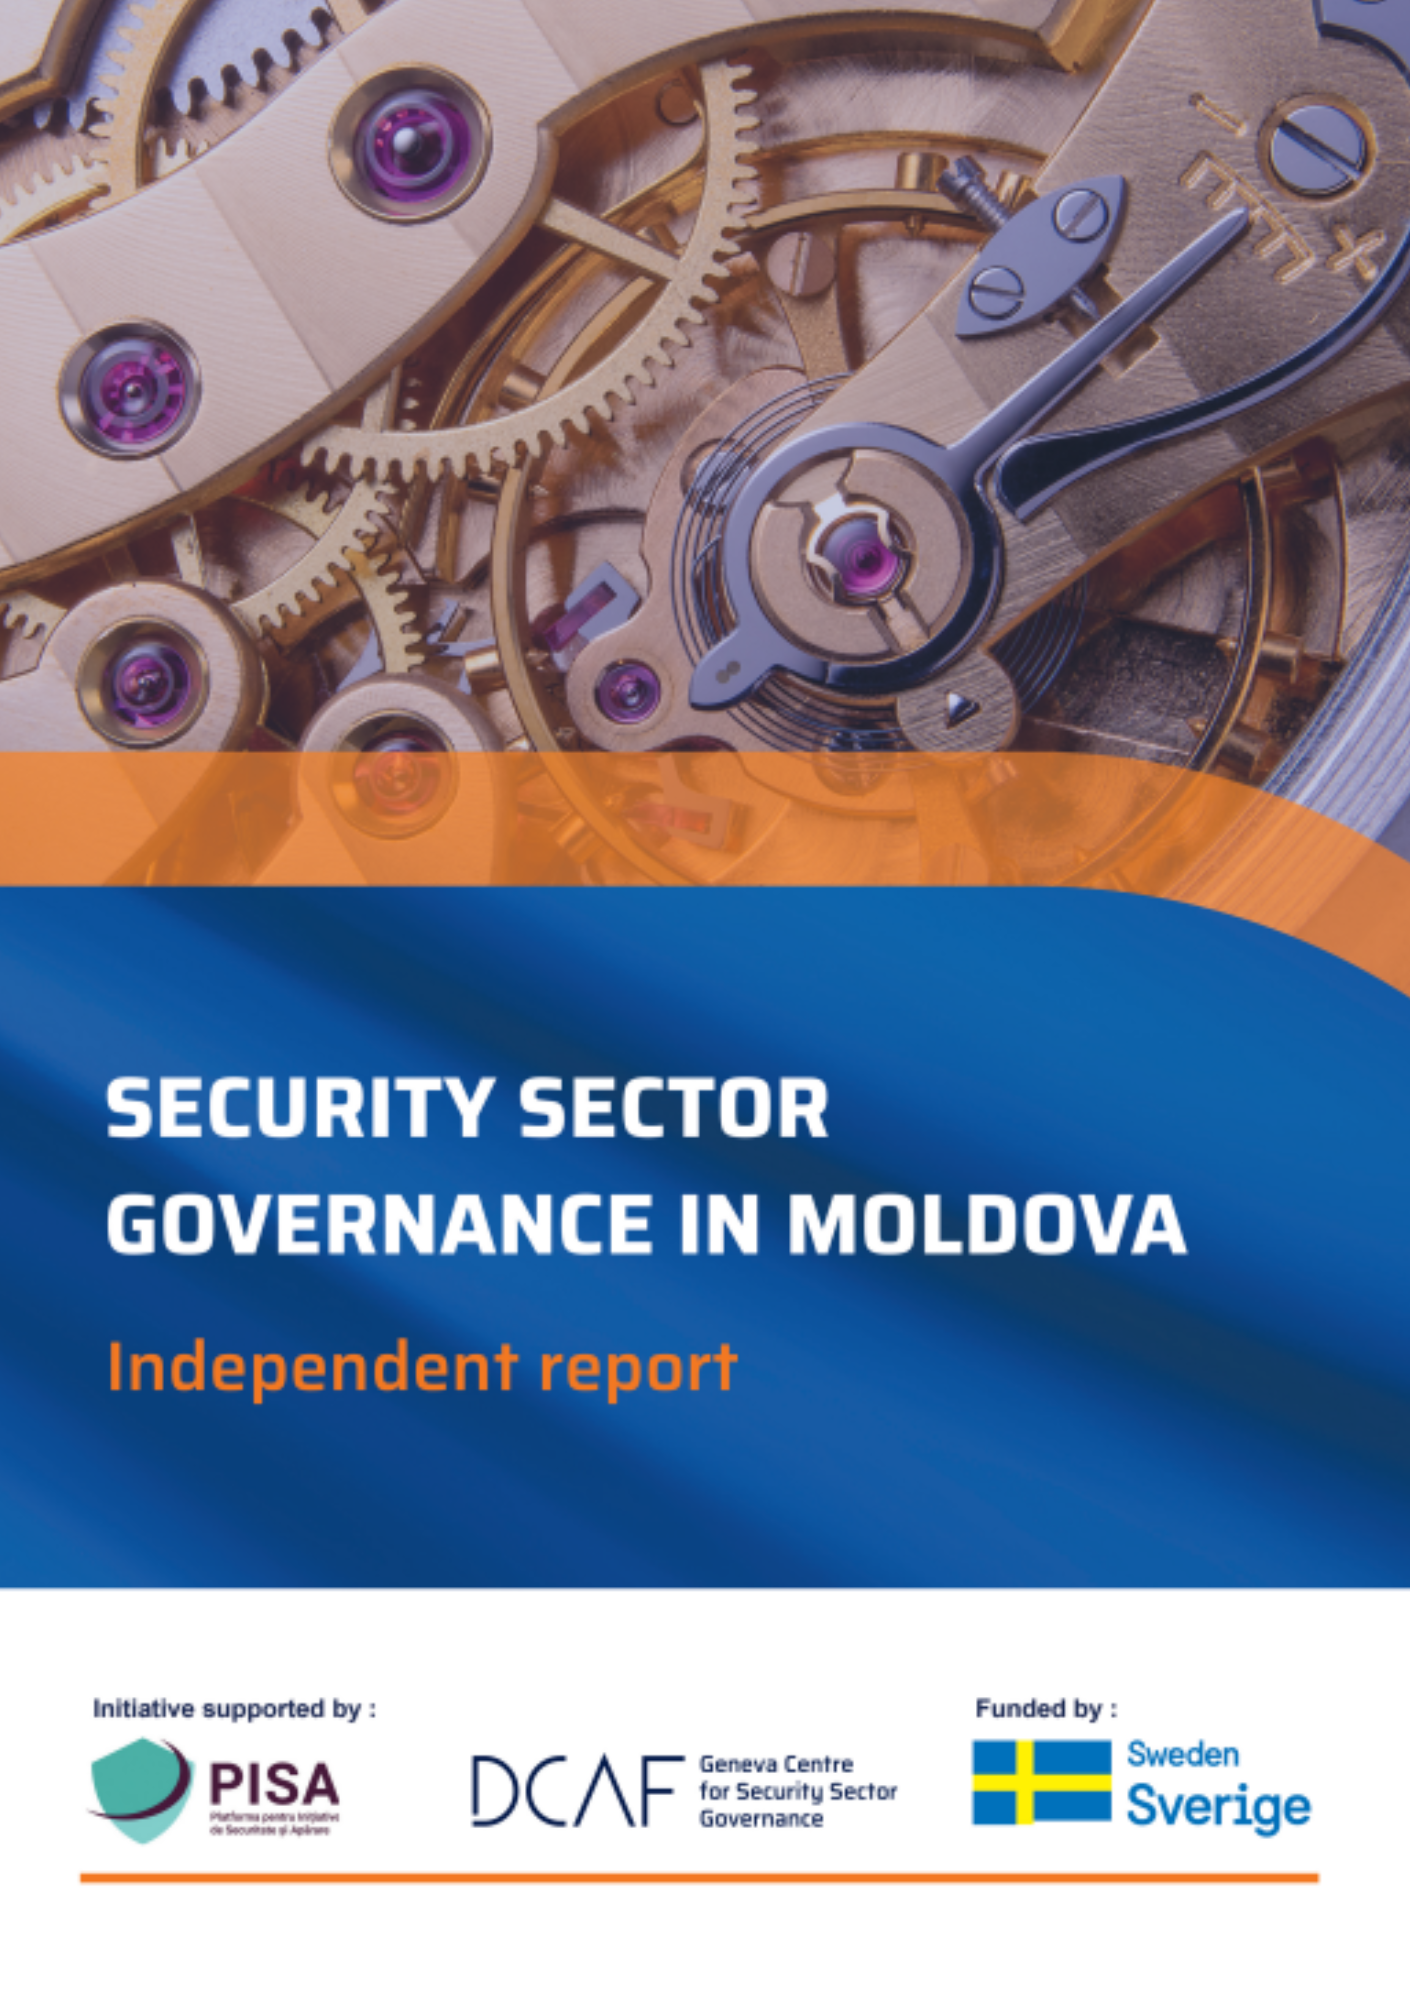 Independent report: Security Sector Governance in Moldova